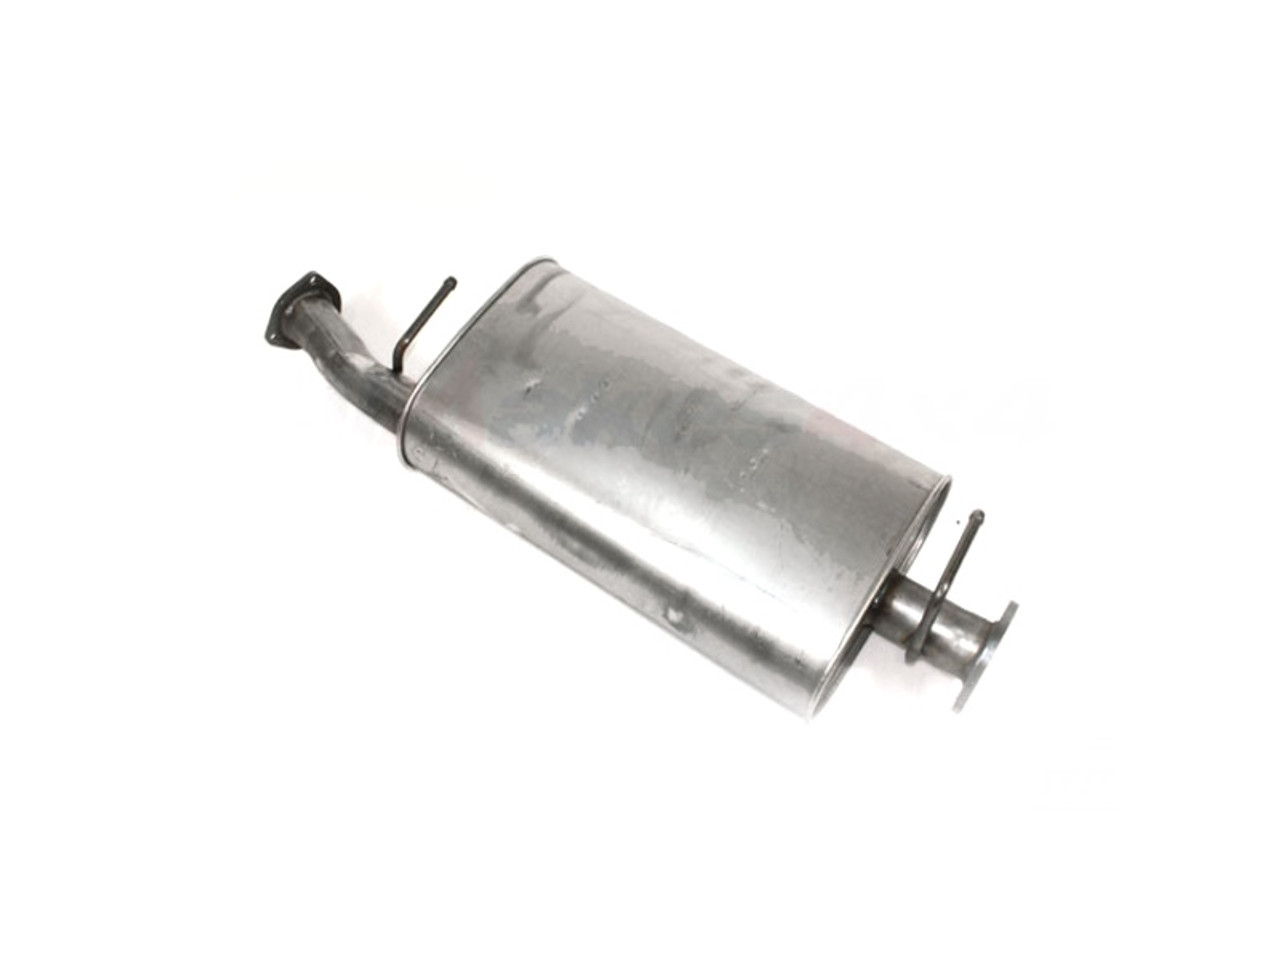 Allmakes 4x4 Discovery 2 Td5 Center Silencer - WDE100590